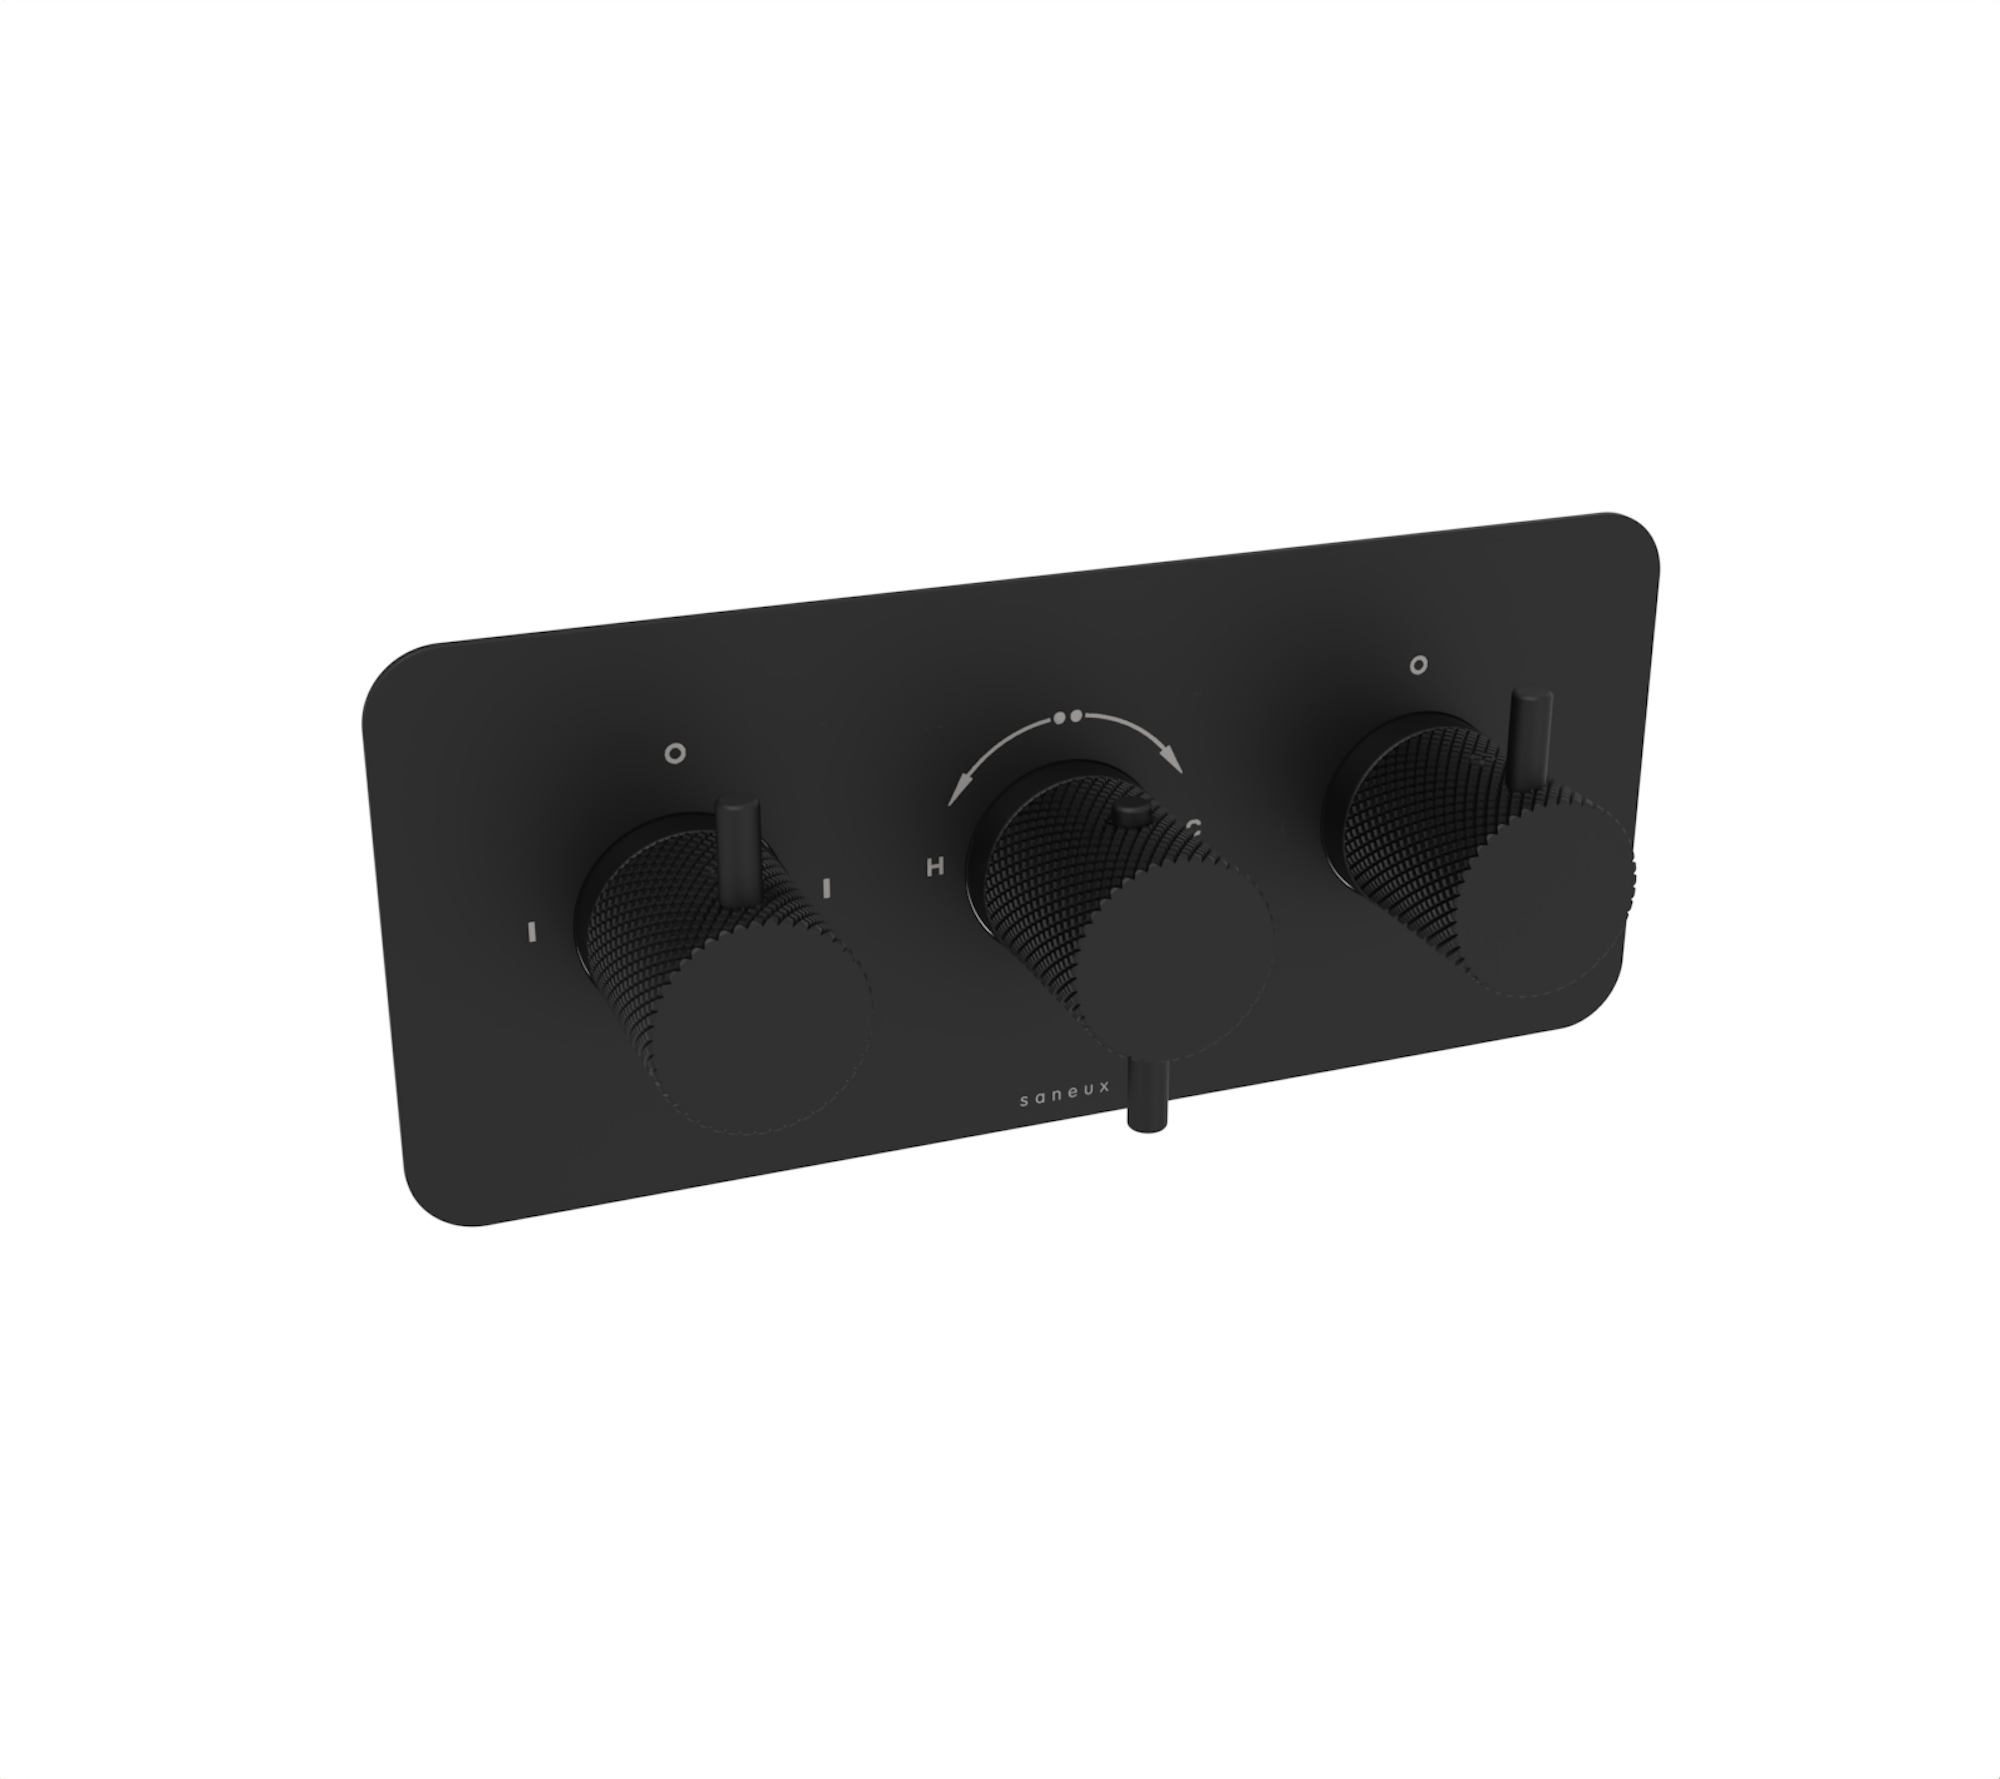 COS 3 way thermostatic shower valve kit with knurled handles in landscape - Matte Black